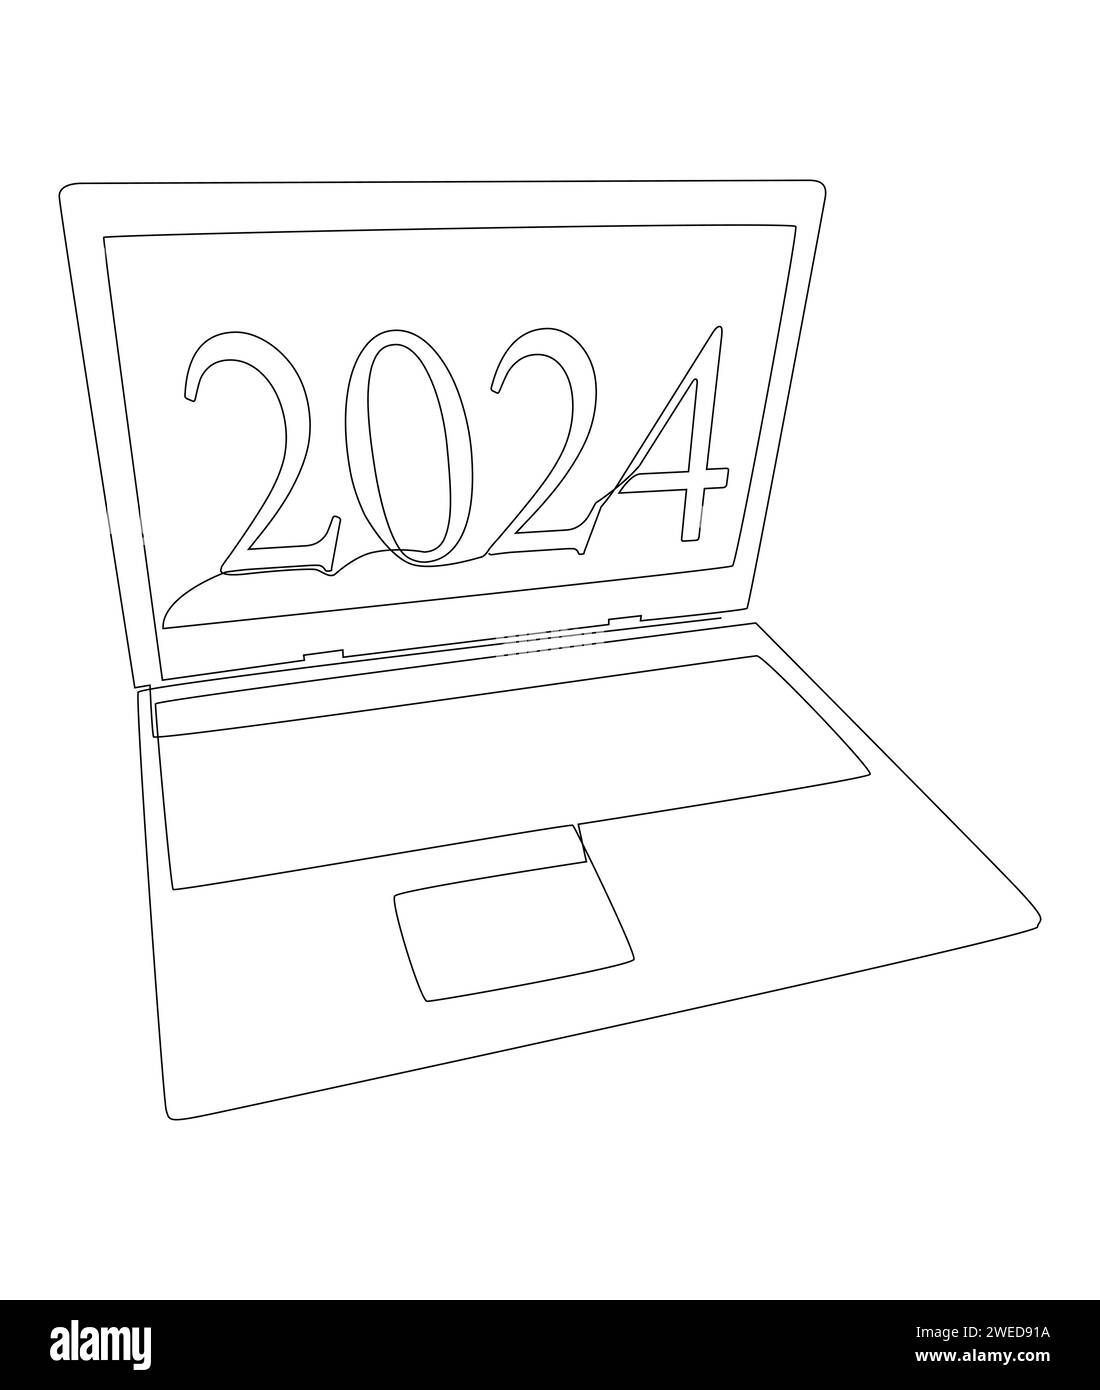 One Continuous Line Of Laptop With Number 2024 Thin Line Illustration Vector Concept Contour Drawing Creative Ideas 2WED91A 